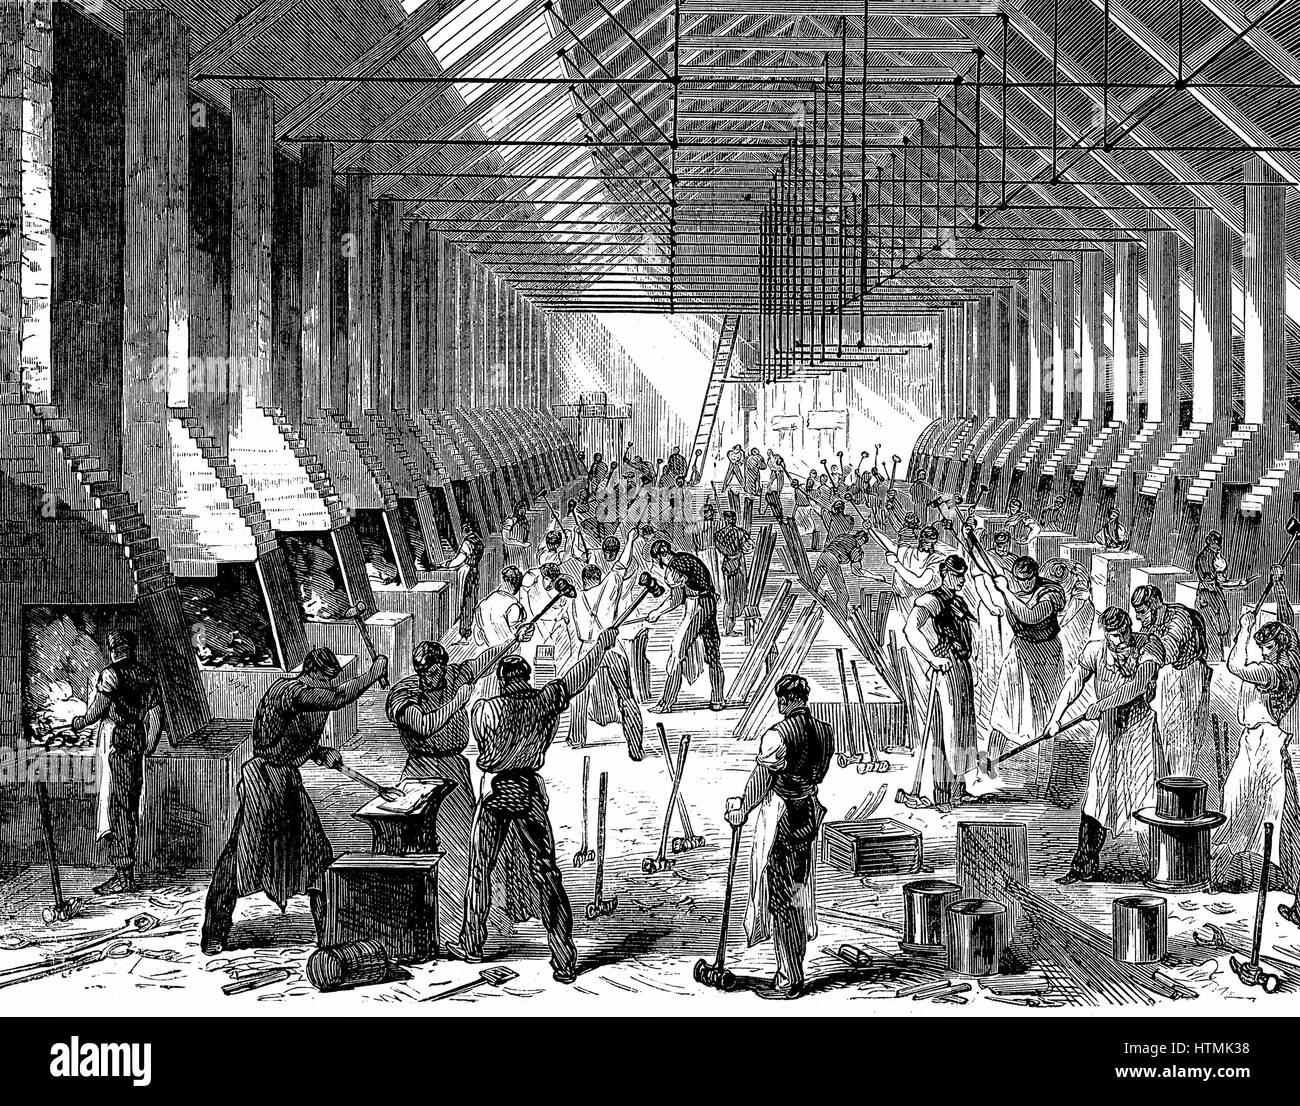 The Railway Carriage Company's works, Oldbury. The forge, showing mass production of components at about 40 identical forges. Wood engraving 1869 Stock Photo